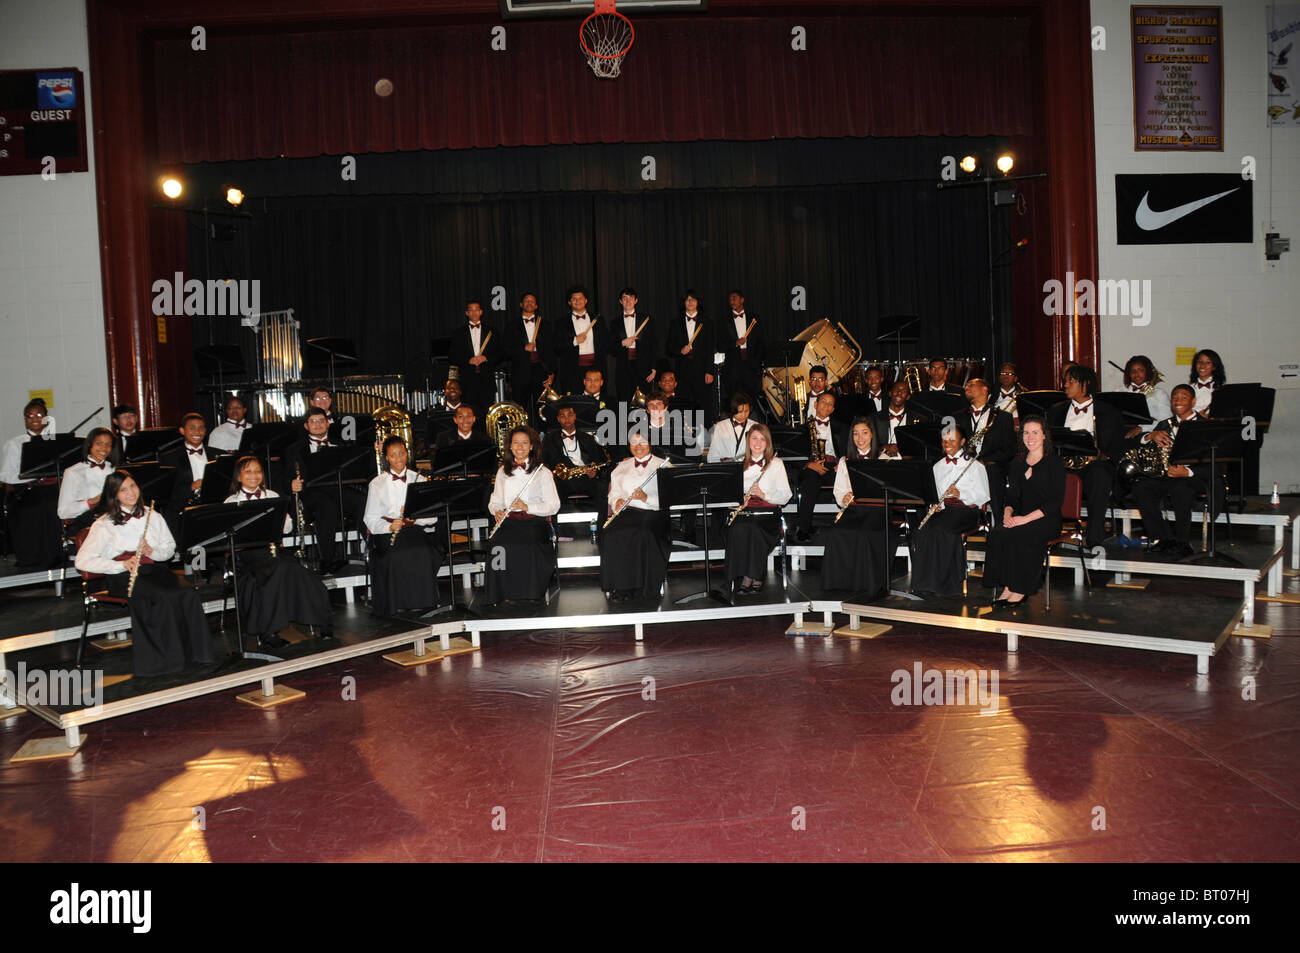 High school concert band picture Forestville, Md. Stock Photo